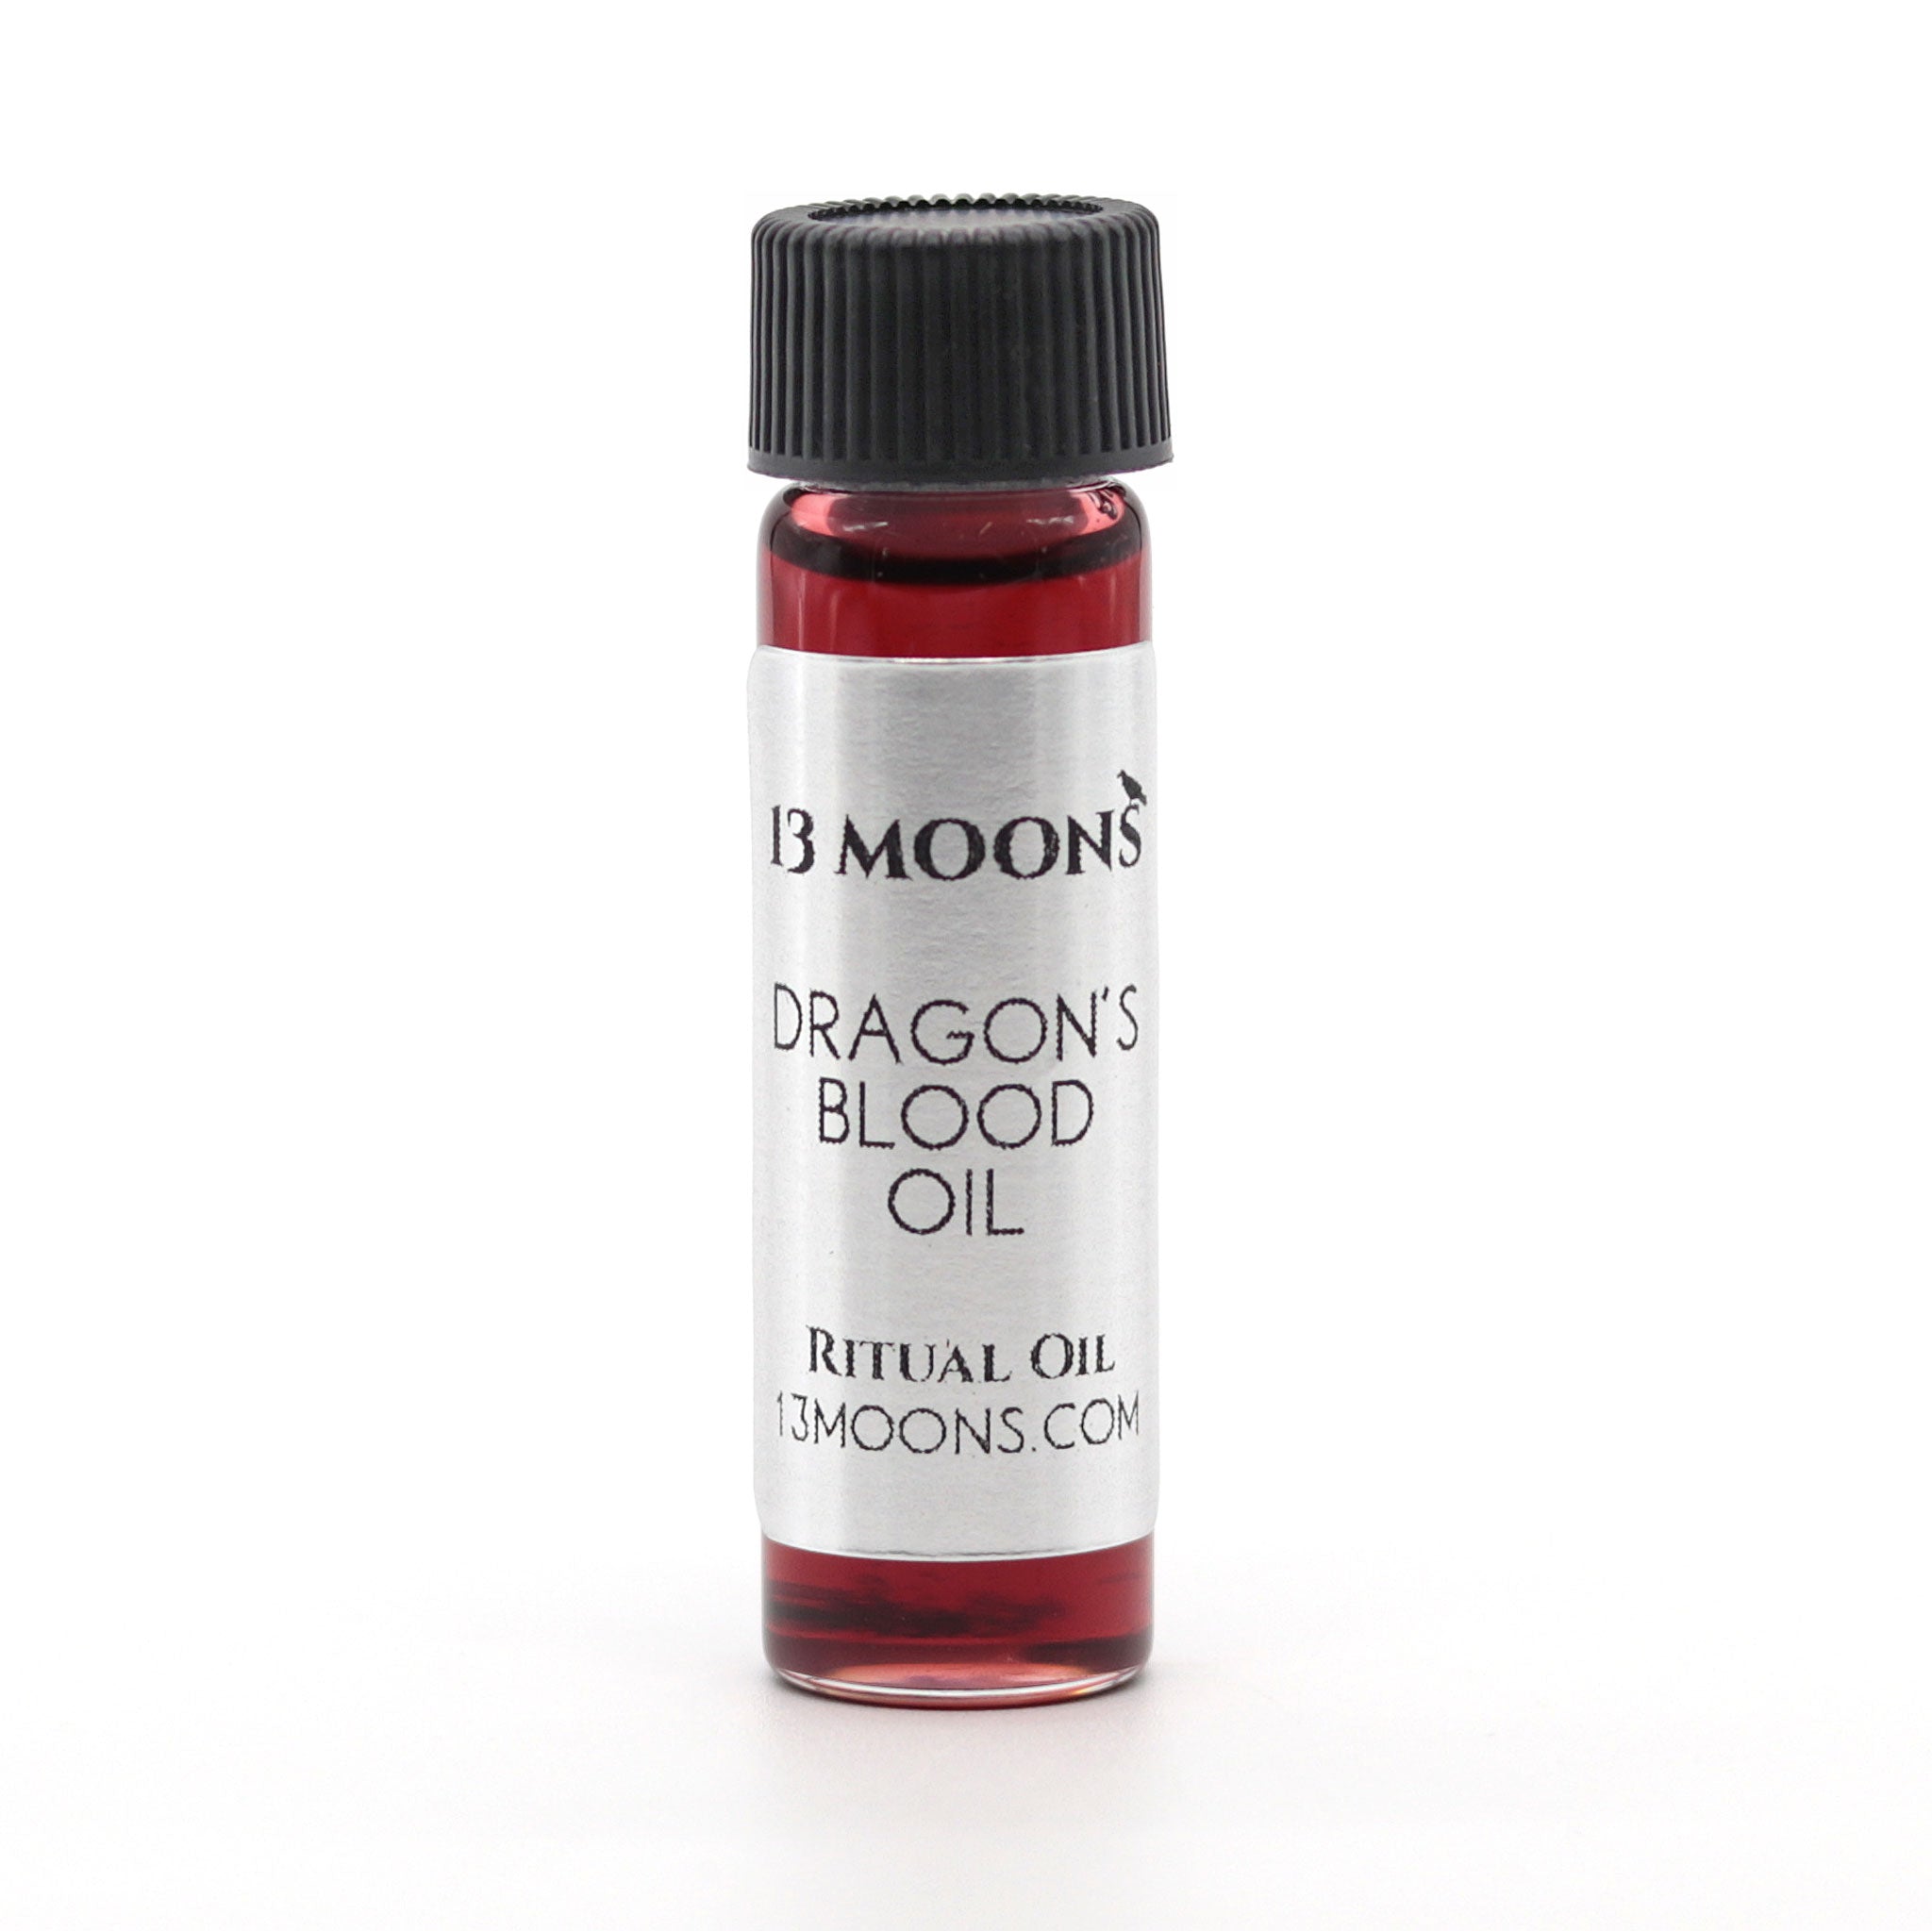 Dragons Blood Oil by 13 Moons - 13 Moons